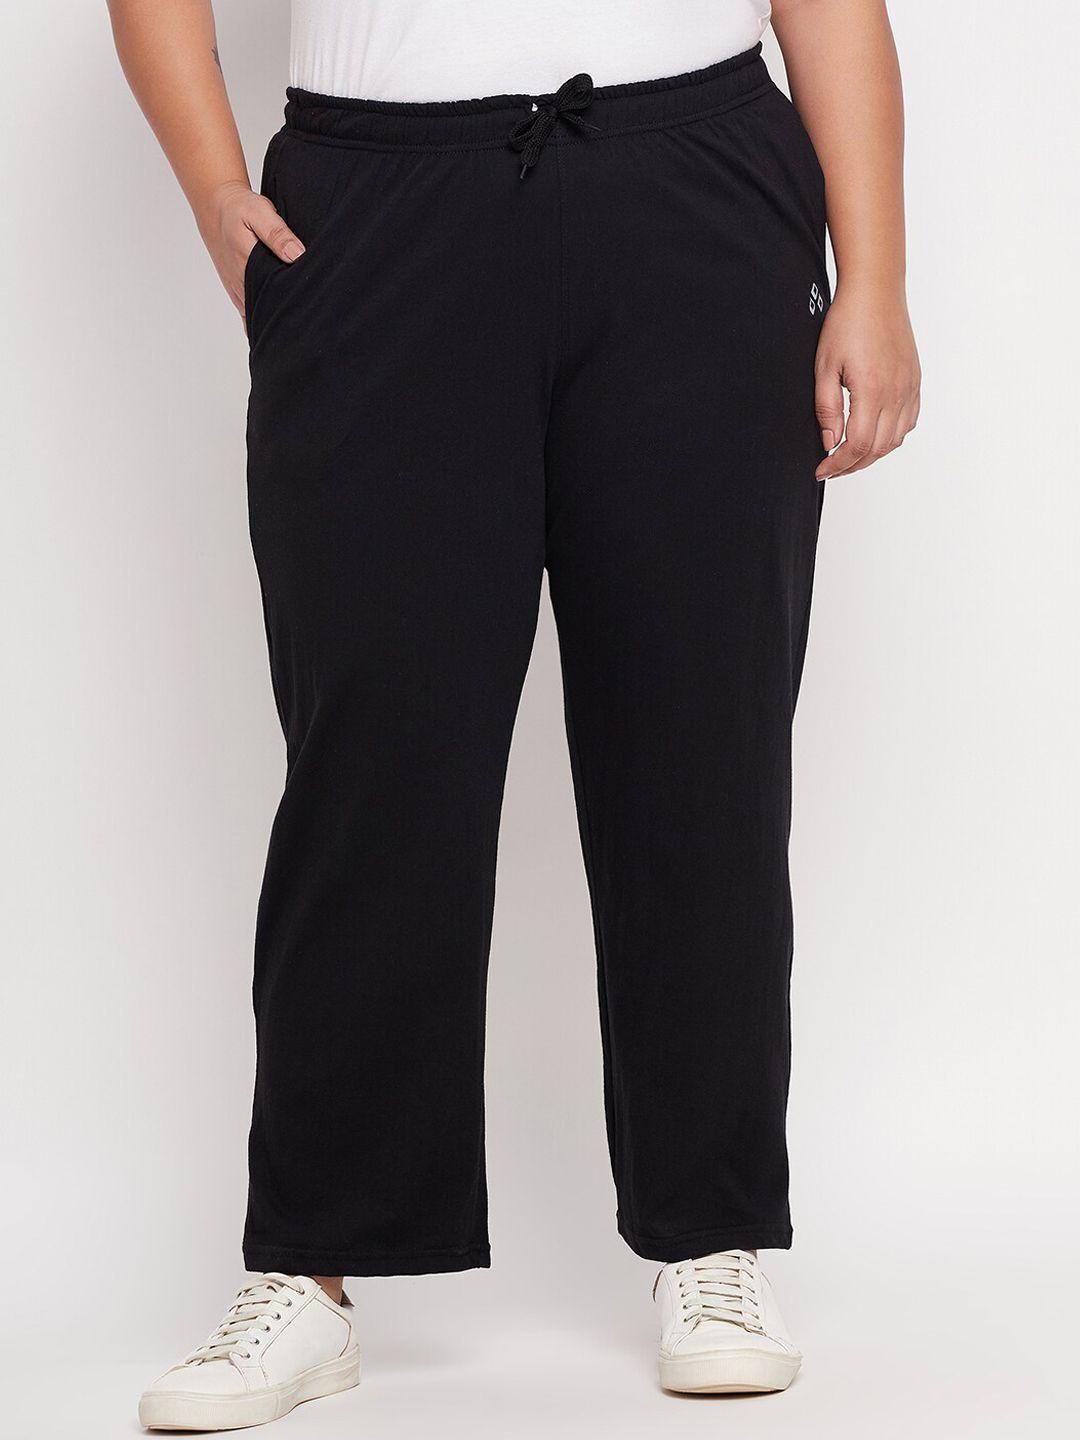 ALIZA Plus Size Cotton Relaxed Fit Track Pants